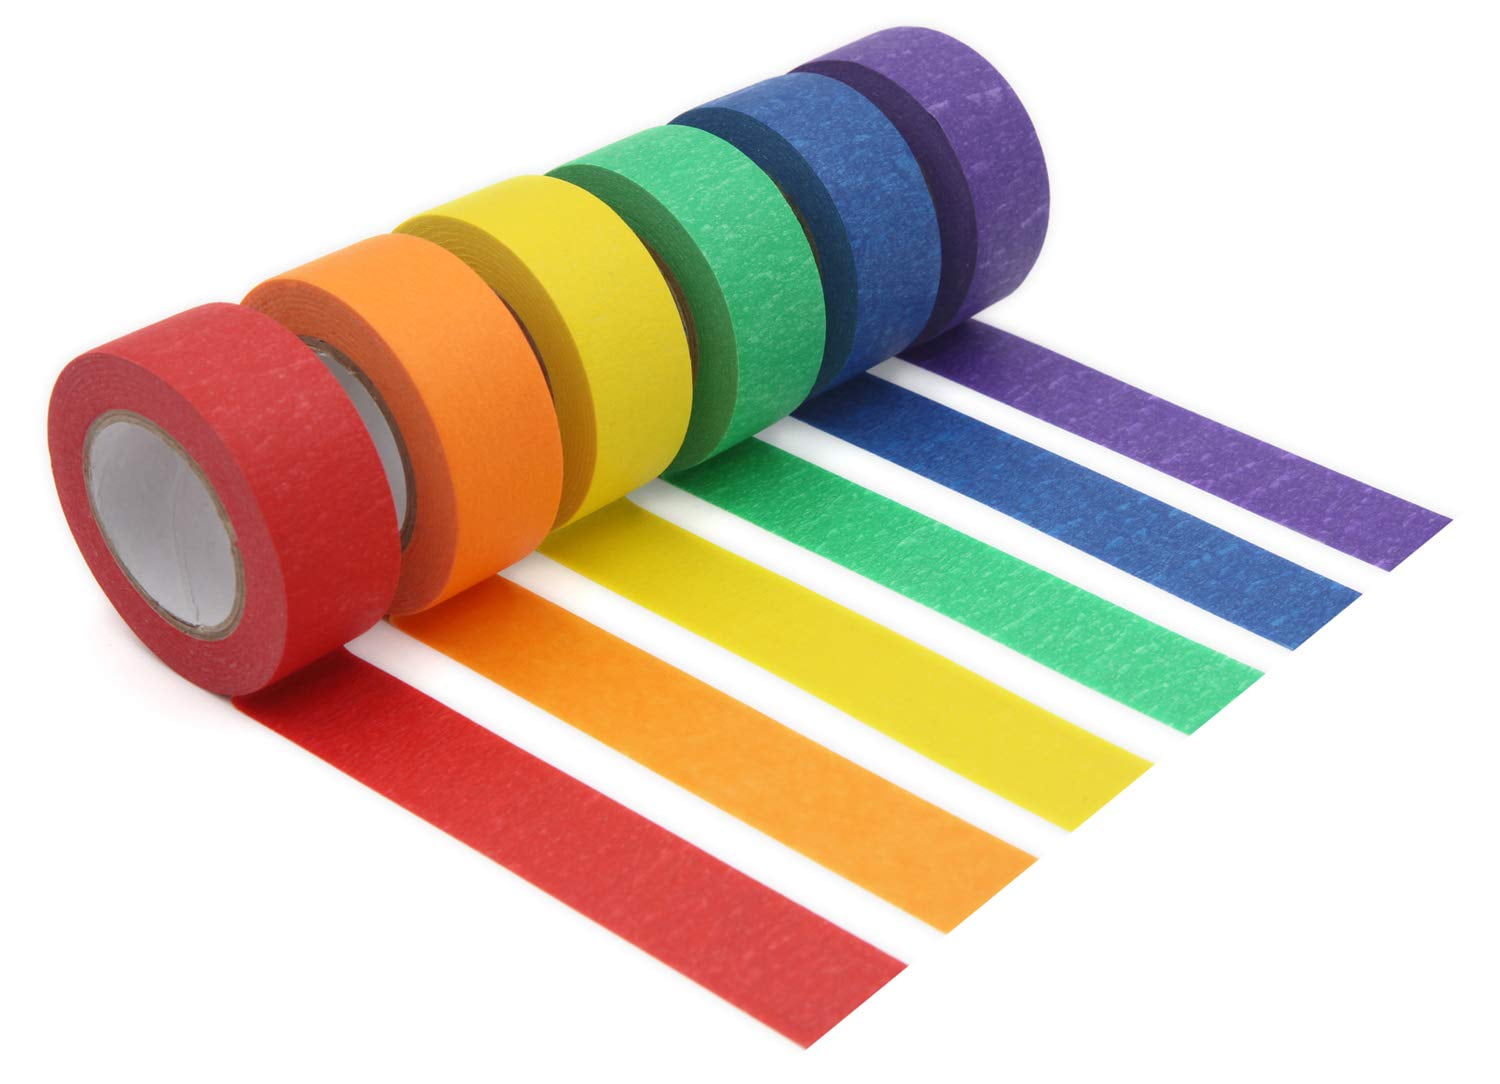  1 Inch Colored Painters Tape Set, Writable Rainbow